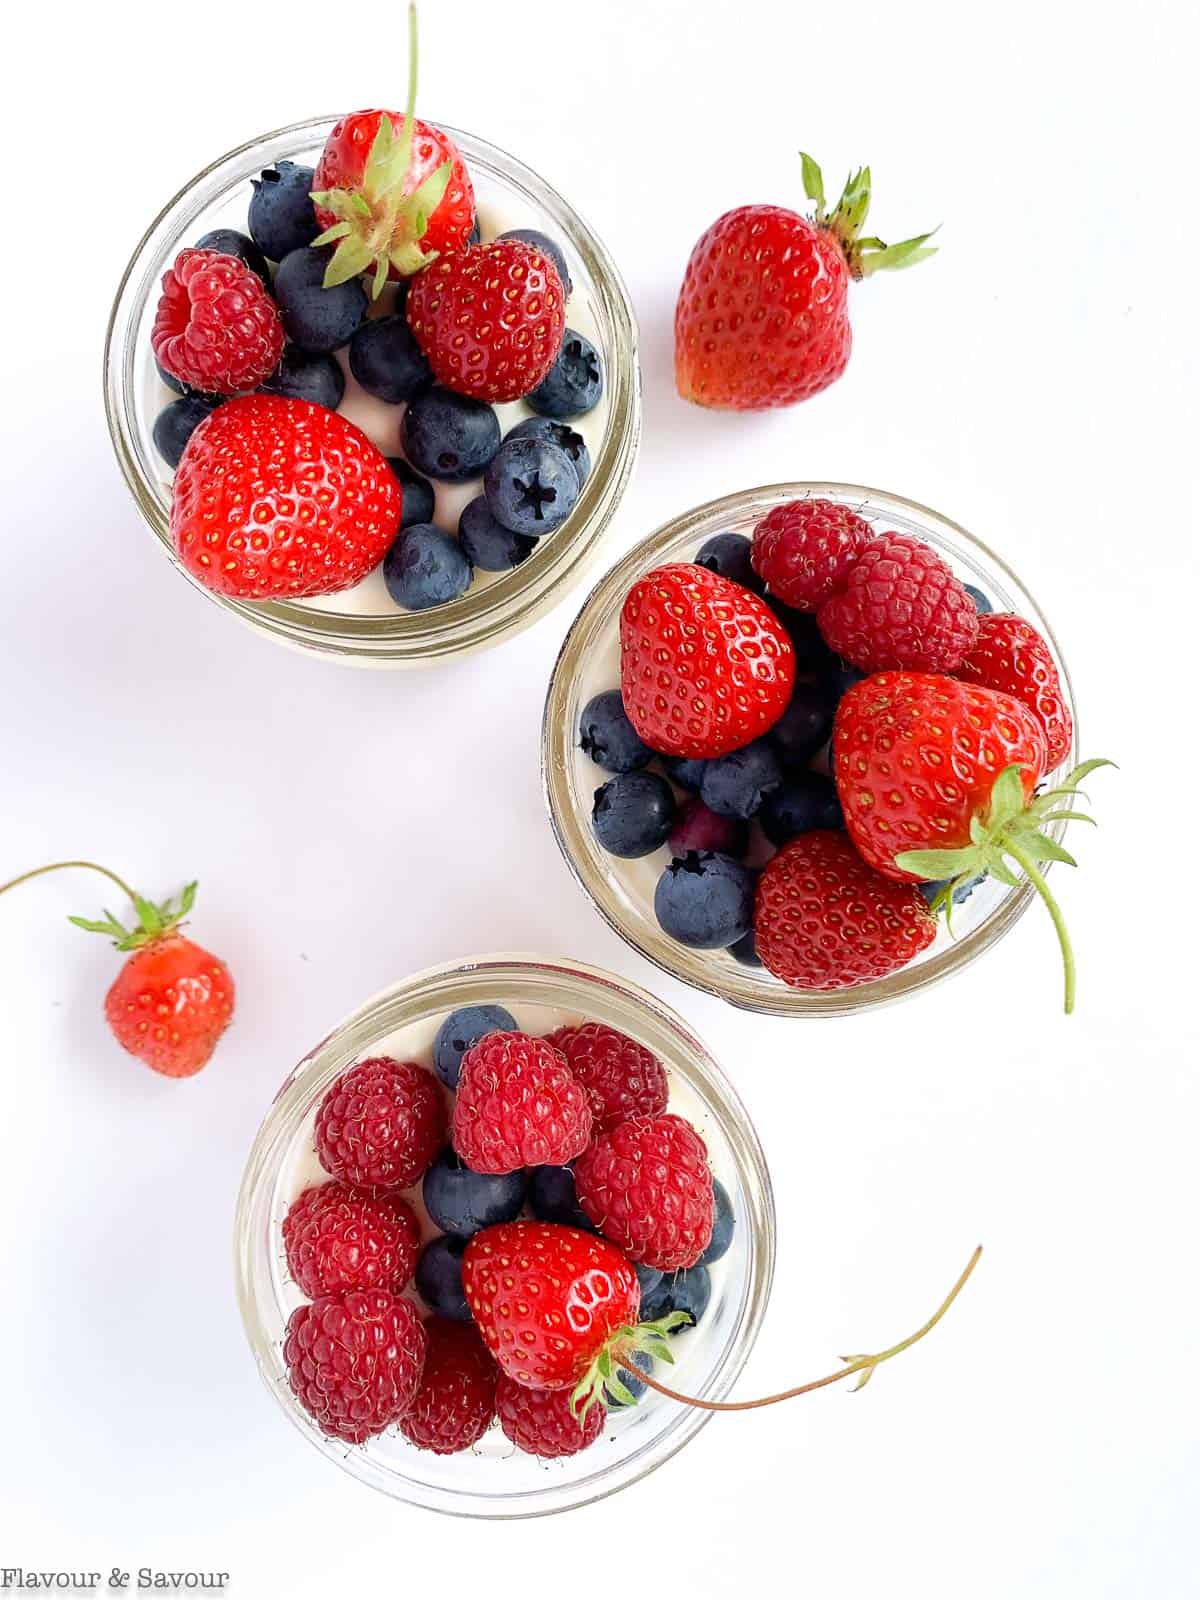 3 small Mason jars filled with no-bake cheesecake and topped with fresh blueberries, strawberries and raspberries